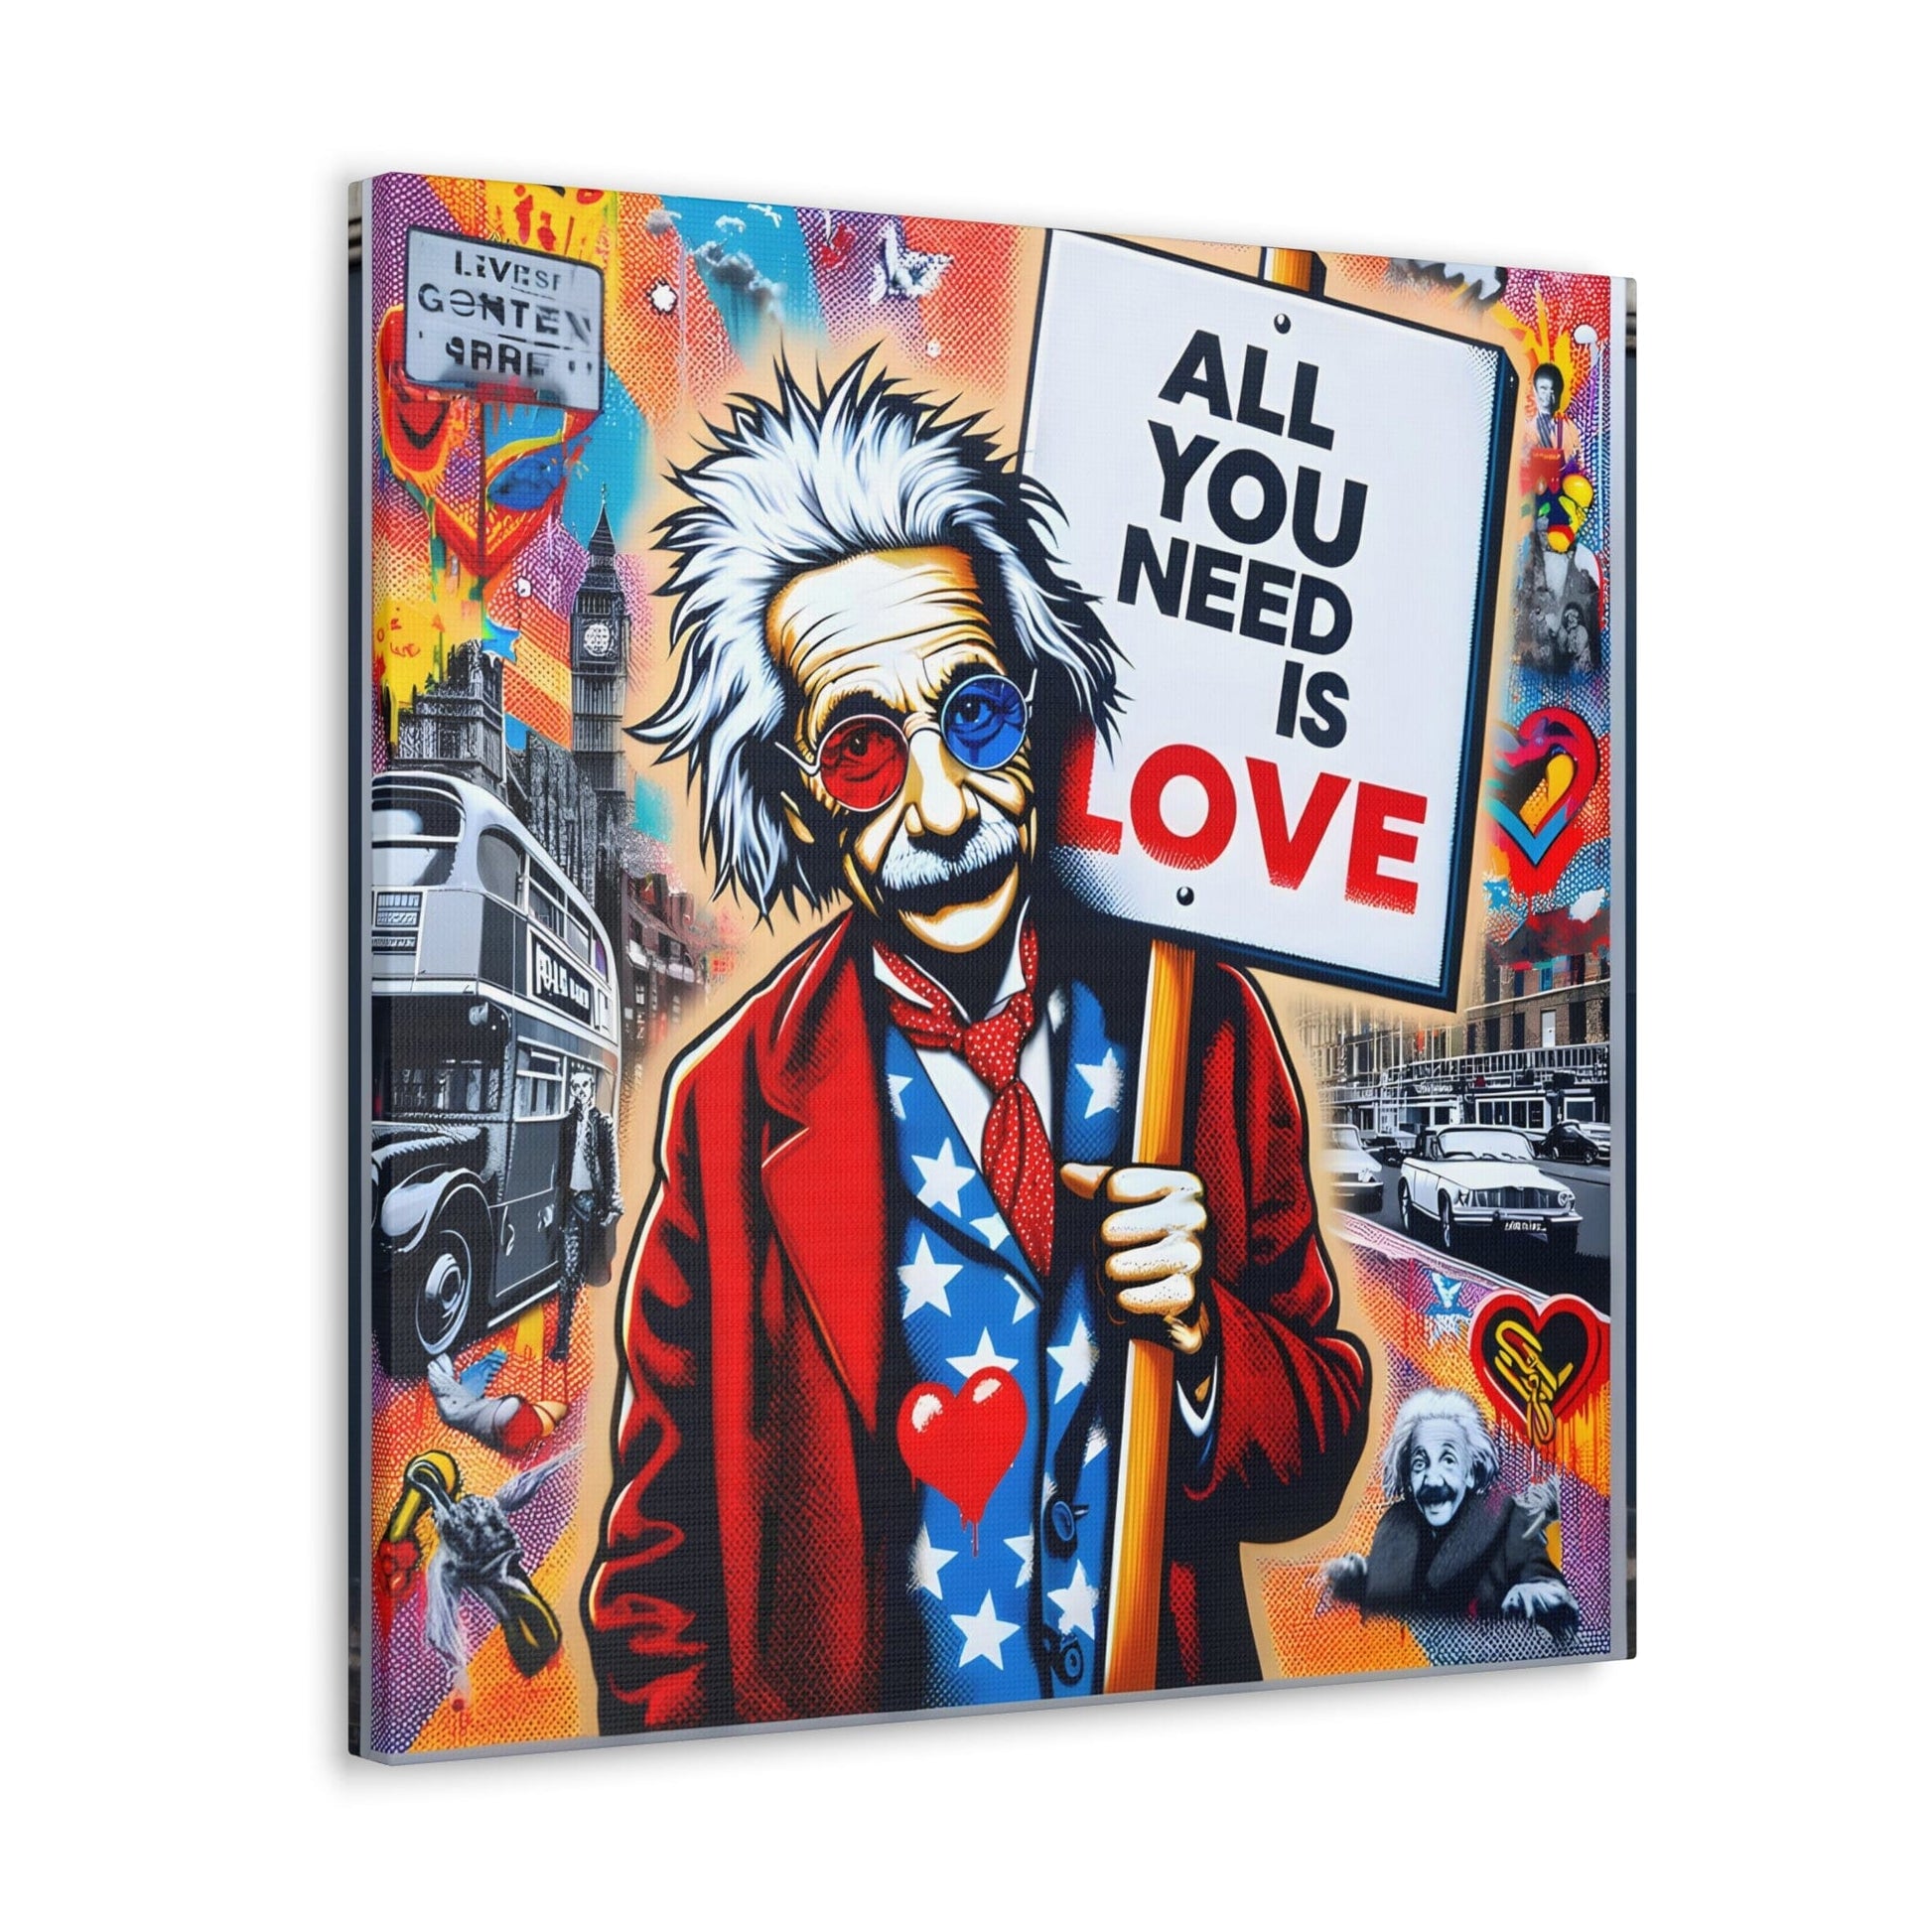 Julian Ardley. Relativity of Love. Exclusive Canvas Graphic Print.